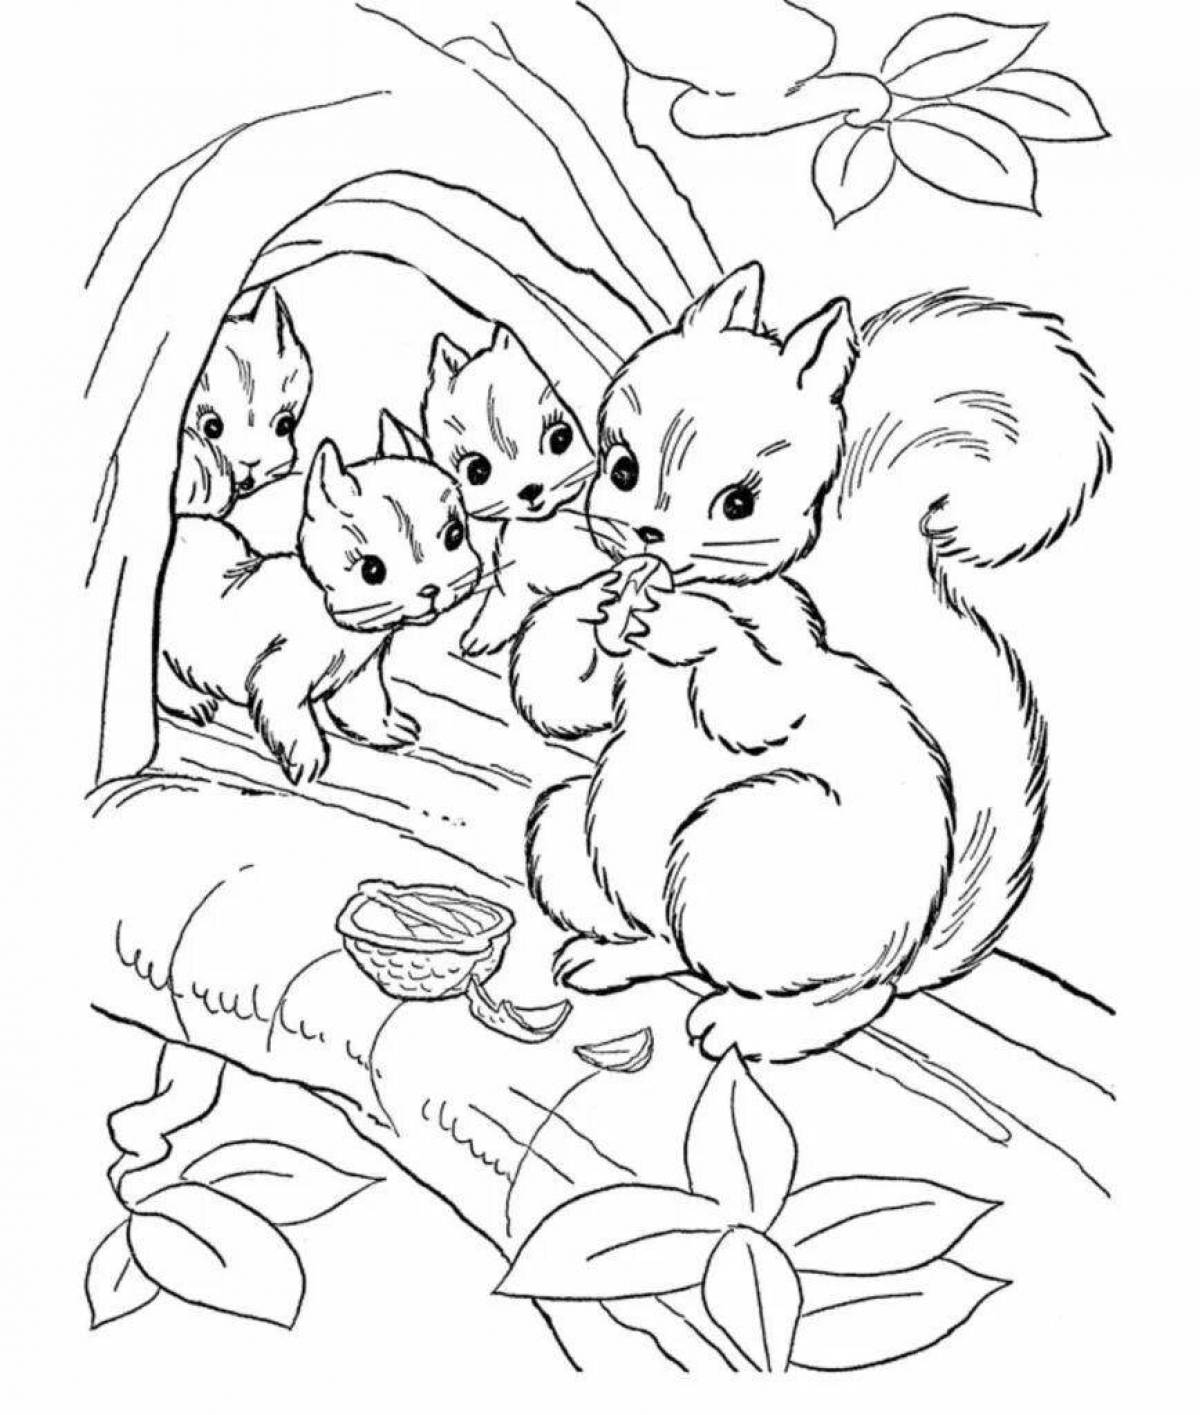 Adorable wild animal coloring book for 2-3 year olds